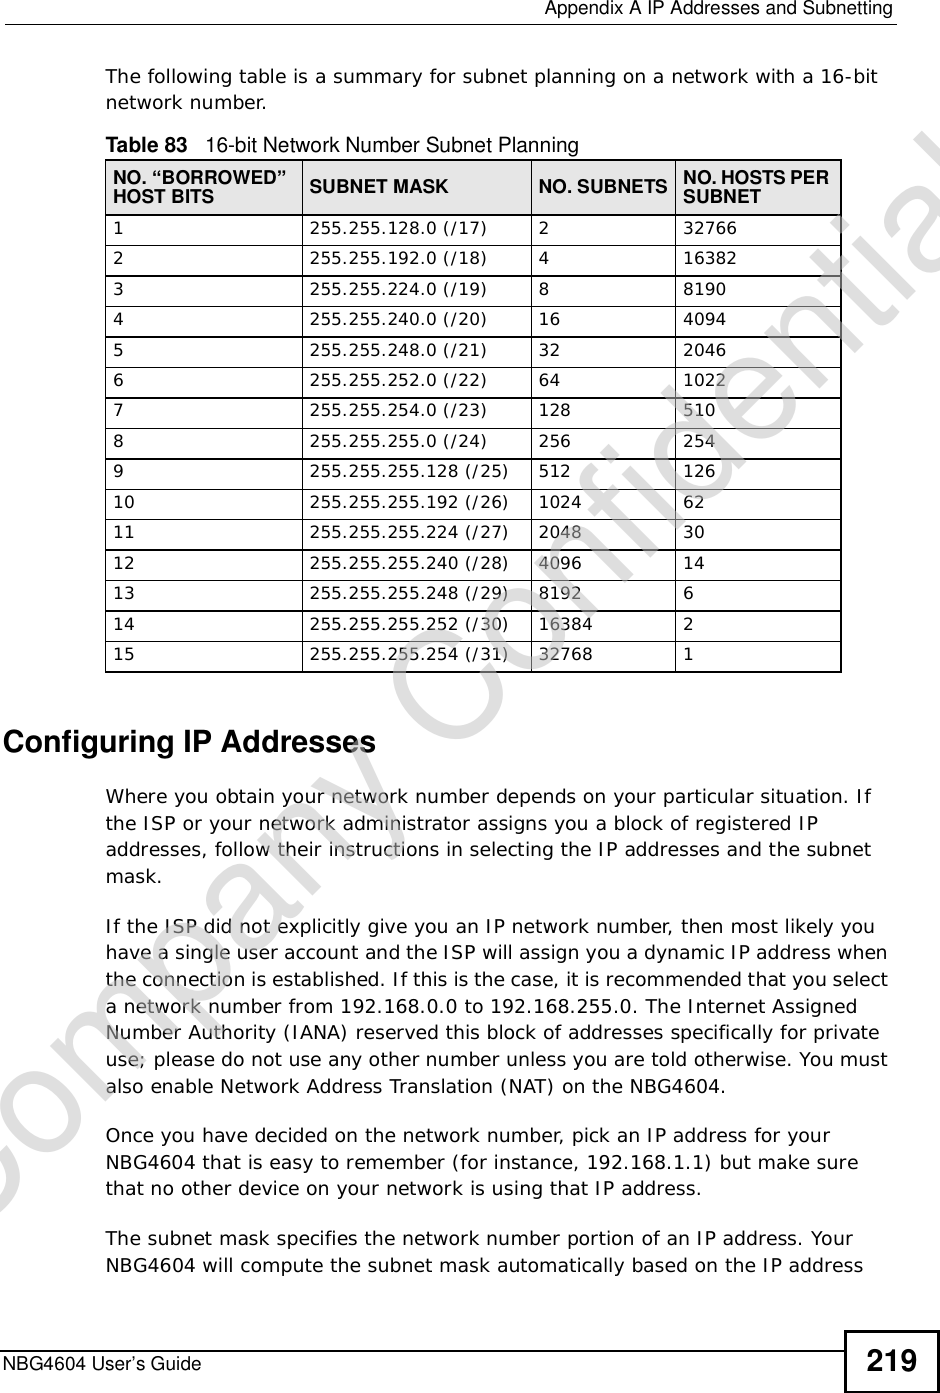  Appendix AIP Addresses and SubnettingNBG4604 User’s Guide 219The following table is a summary for subnet planning on a network with a 16-bit network number. Configuring IP AddressesWhere you obtain your network number depends on your particular situation. If the ISP or your network administrator assigns you a block of registered IP addresses, follow their instructions in selecting the IP addresses and the subnet mask.If the ISP did not explicitly give you an IP network number, then most likely you have a single user account and the ISP will assign you a dynamic IP address when the connection is established. If this is the case, it is recommended that you select a network number from 192.168.0.0 to 192.168.255.0. The Internet Assigned Number Authority (IANA) reserved this block of addresses specifically for private use; please do not use any other number unless you are told otherwise. You must also enable Network Address Translation (NAT) on the NBG4604. Once you have decided on the network number, pick an IP address for your NBG4604 that is easy to remember (for instance, 192.168.1.1) but make sure that no other device on your network is using that IP address.The subnet mask specifies the network number portion of an IP address. Your NBG4604 will compute the subnet mask automatically based on the IP address Table 83   16-bit Network Number Subnet PlanningNO. “BORROWED” HOST BITS SUBNET MASK NO. SUBNETS NO. HOSTS PER SUBNET1255.255.128.0 (/17) 2 327662 255.255.192.0 (/18) 4 163823 255.255.224.0 (/19) 8 81904255.255.240.0 (/20) 16 40945255.255.248.0 (/21) 32 20466255.255.252.0 (/22) 64 10227255.255.254.0 (/23) 128 5108 255.255.255.0 (/24) 256 2549 255.255.255.128 (/25) 512 12610 255.255.255.192 (/26) 1024 6211 255.255.255.224 (/27) 2048 3012 255.255.255.240 (/28) 4096 1413 255.255.255.248 (/29) 8192 614 255.255.255.252 (/30) 16384 215 255.255.255.254 (/31) 32768 1Company Confidential